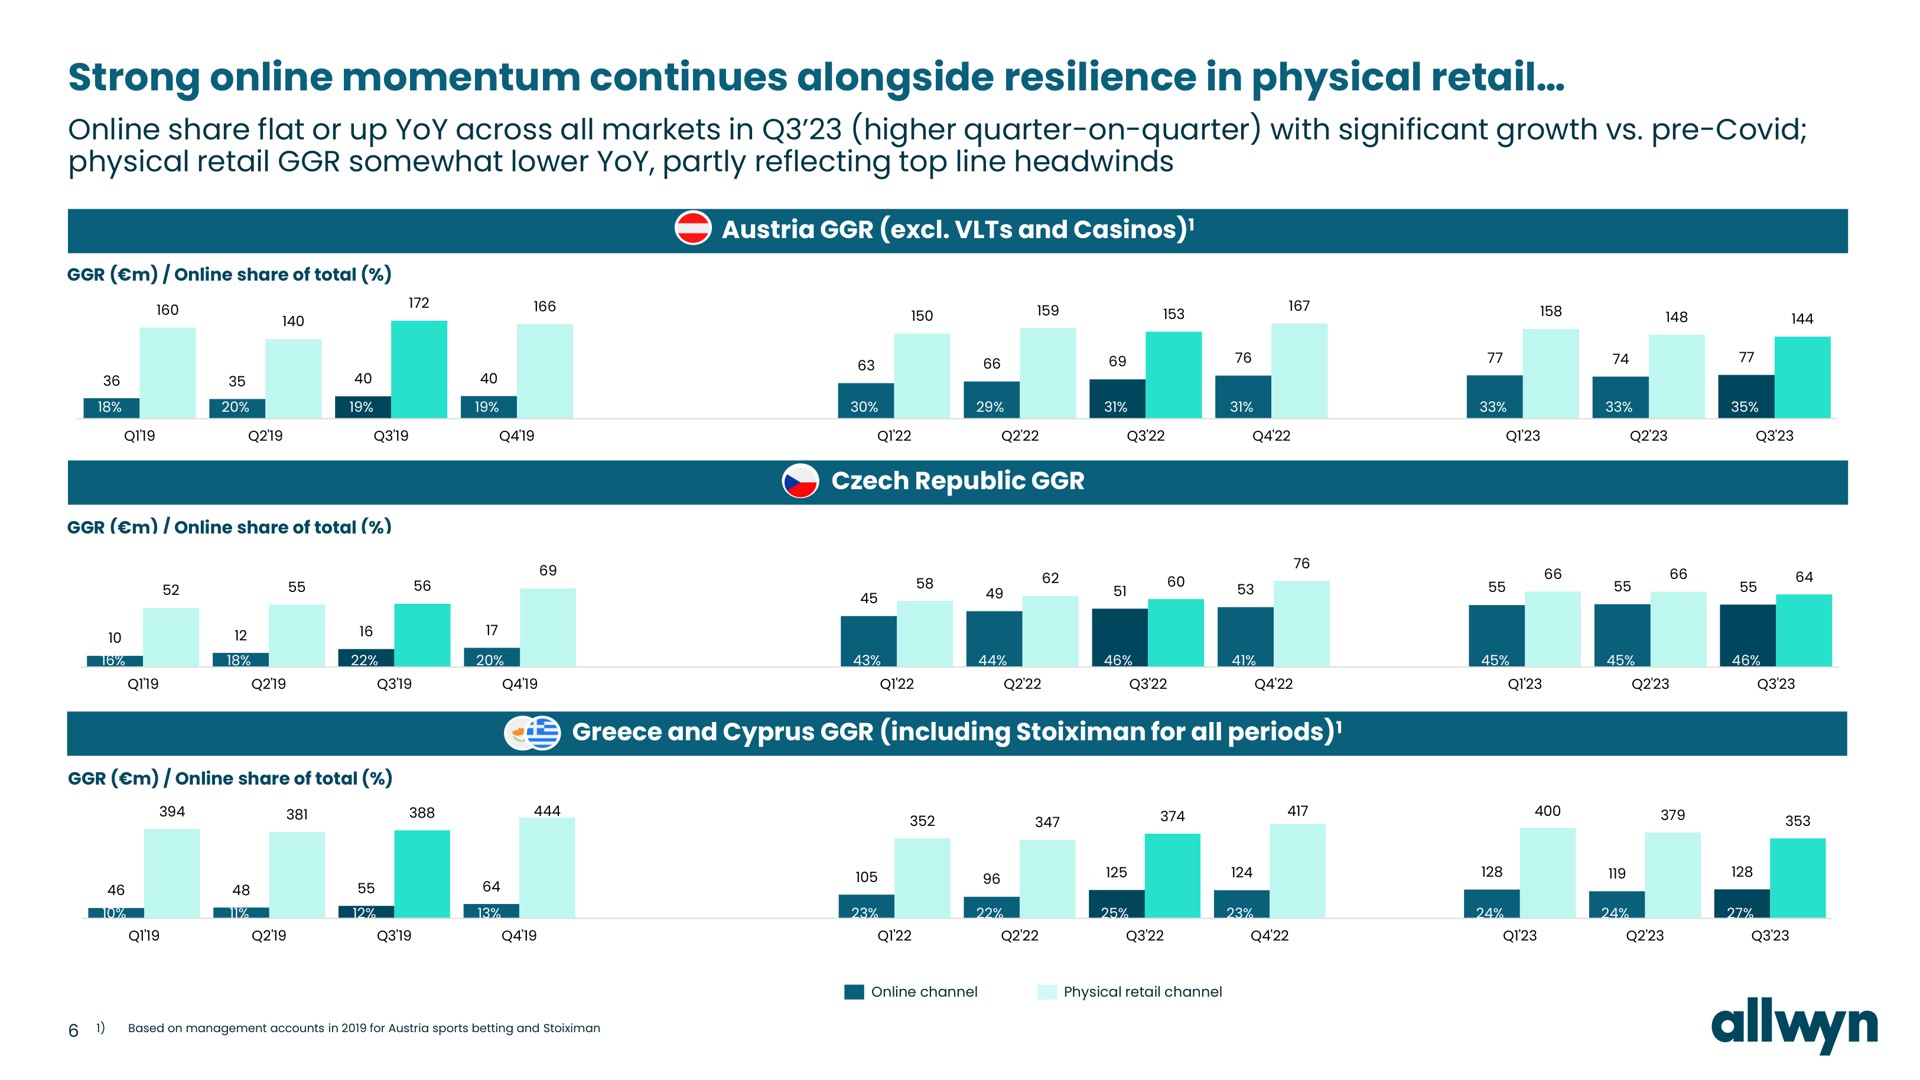 strong momentum continues alongside resilience in physical retail share flat or up yoy across all markets in higher quarter on quarter with significant growth covid physical retail somewhat lower yoy partly reflecting top line | Allwyn